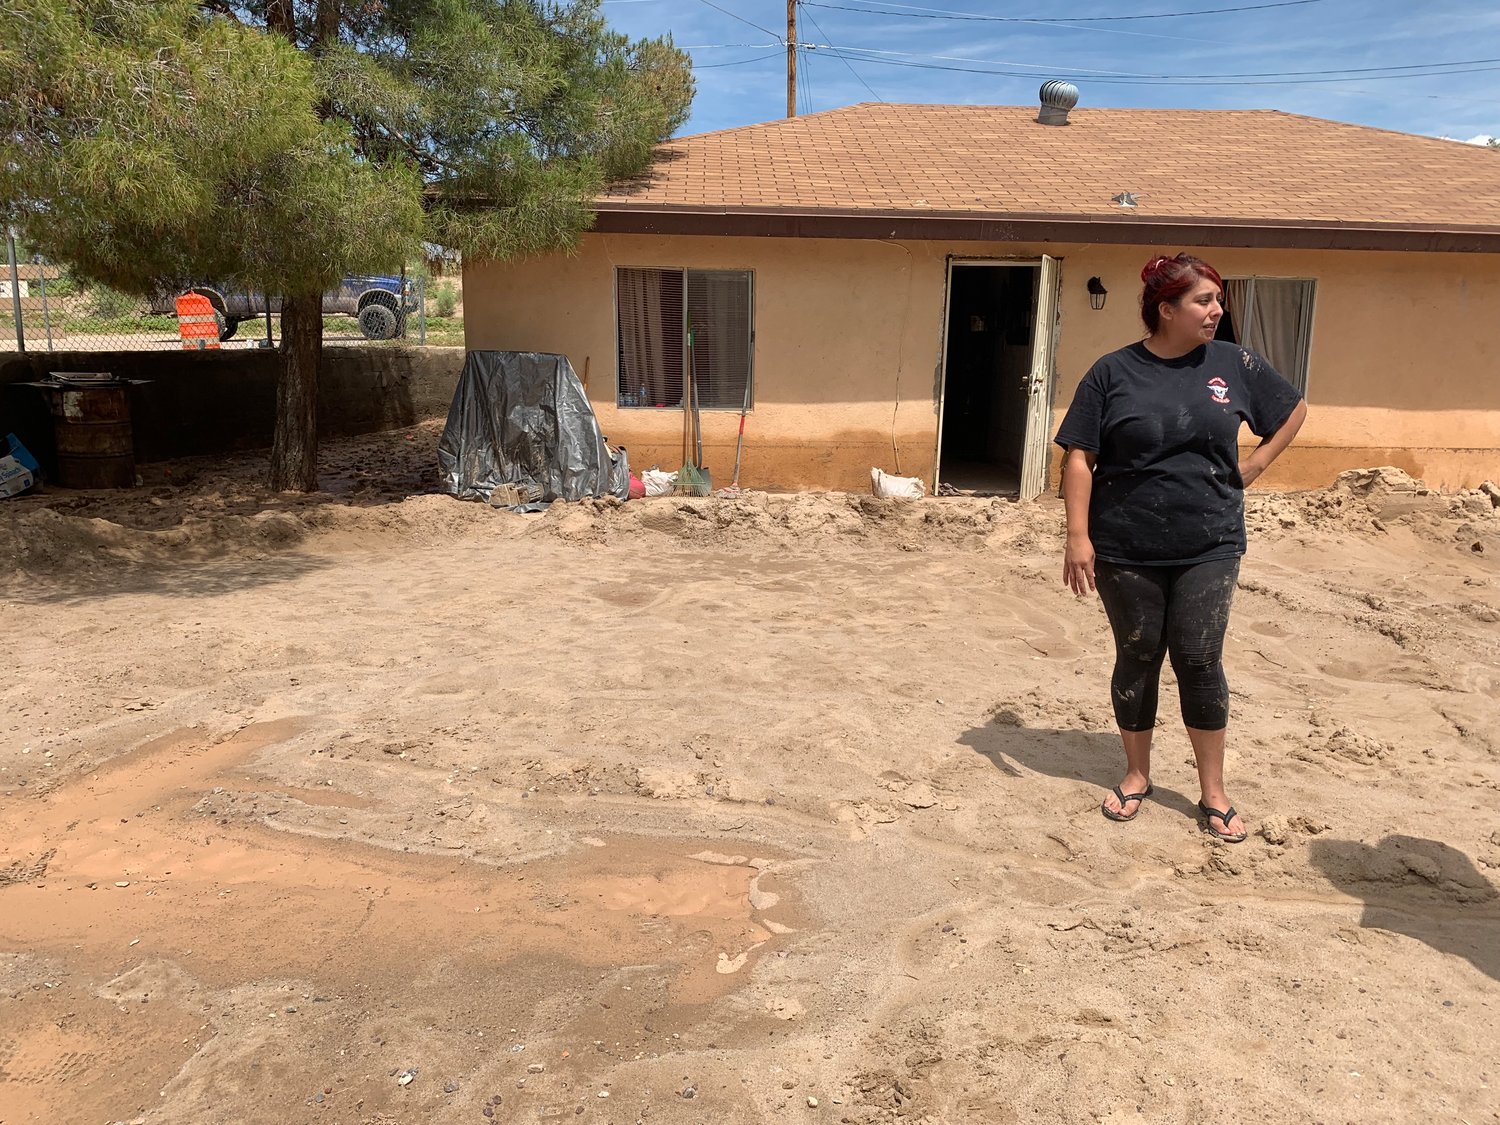 Clarissa Soto stands before the La Union home her father built 37 years earlier where she lives with her mother, daughter and two dogs. The family escaped the water flooding the house through a window.